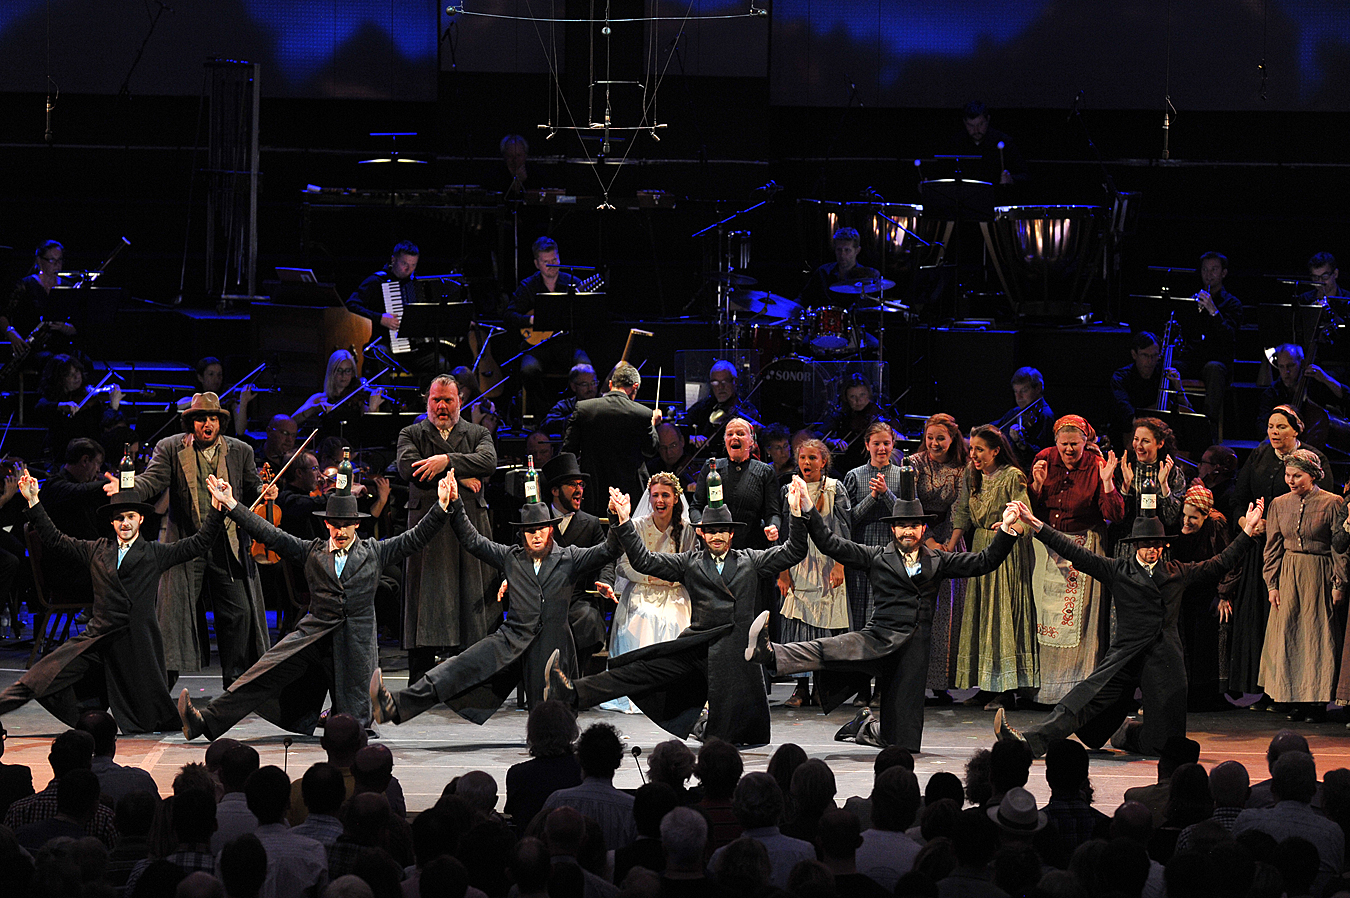 Dance routine in Proms Fiddler on the Roof 